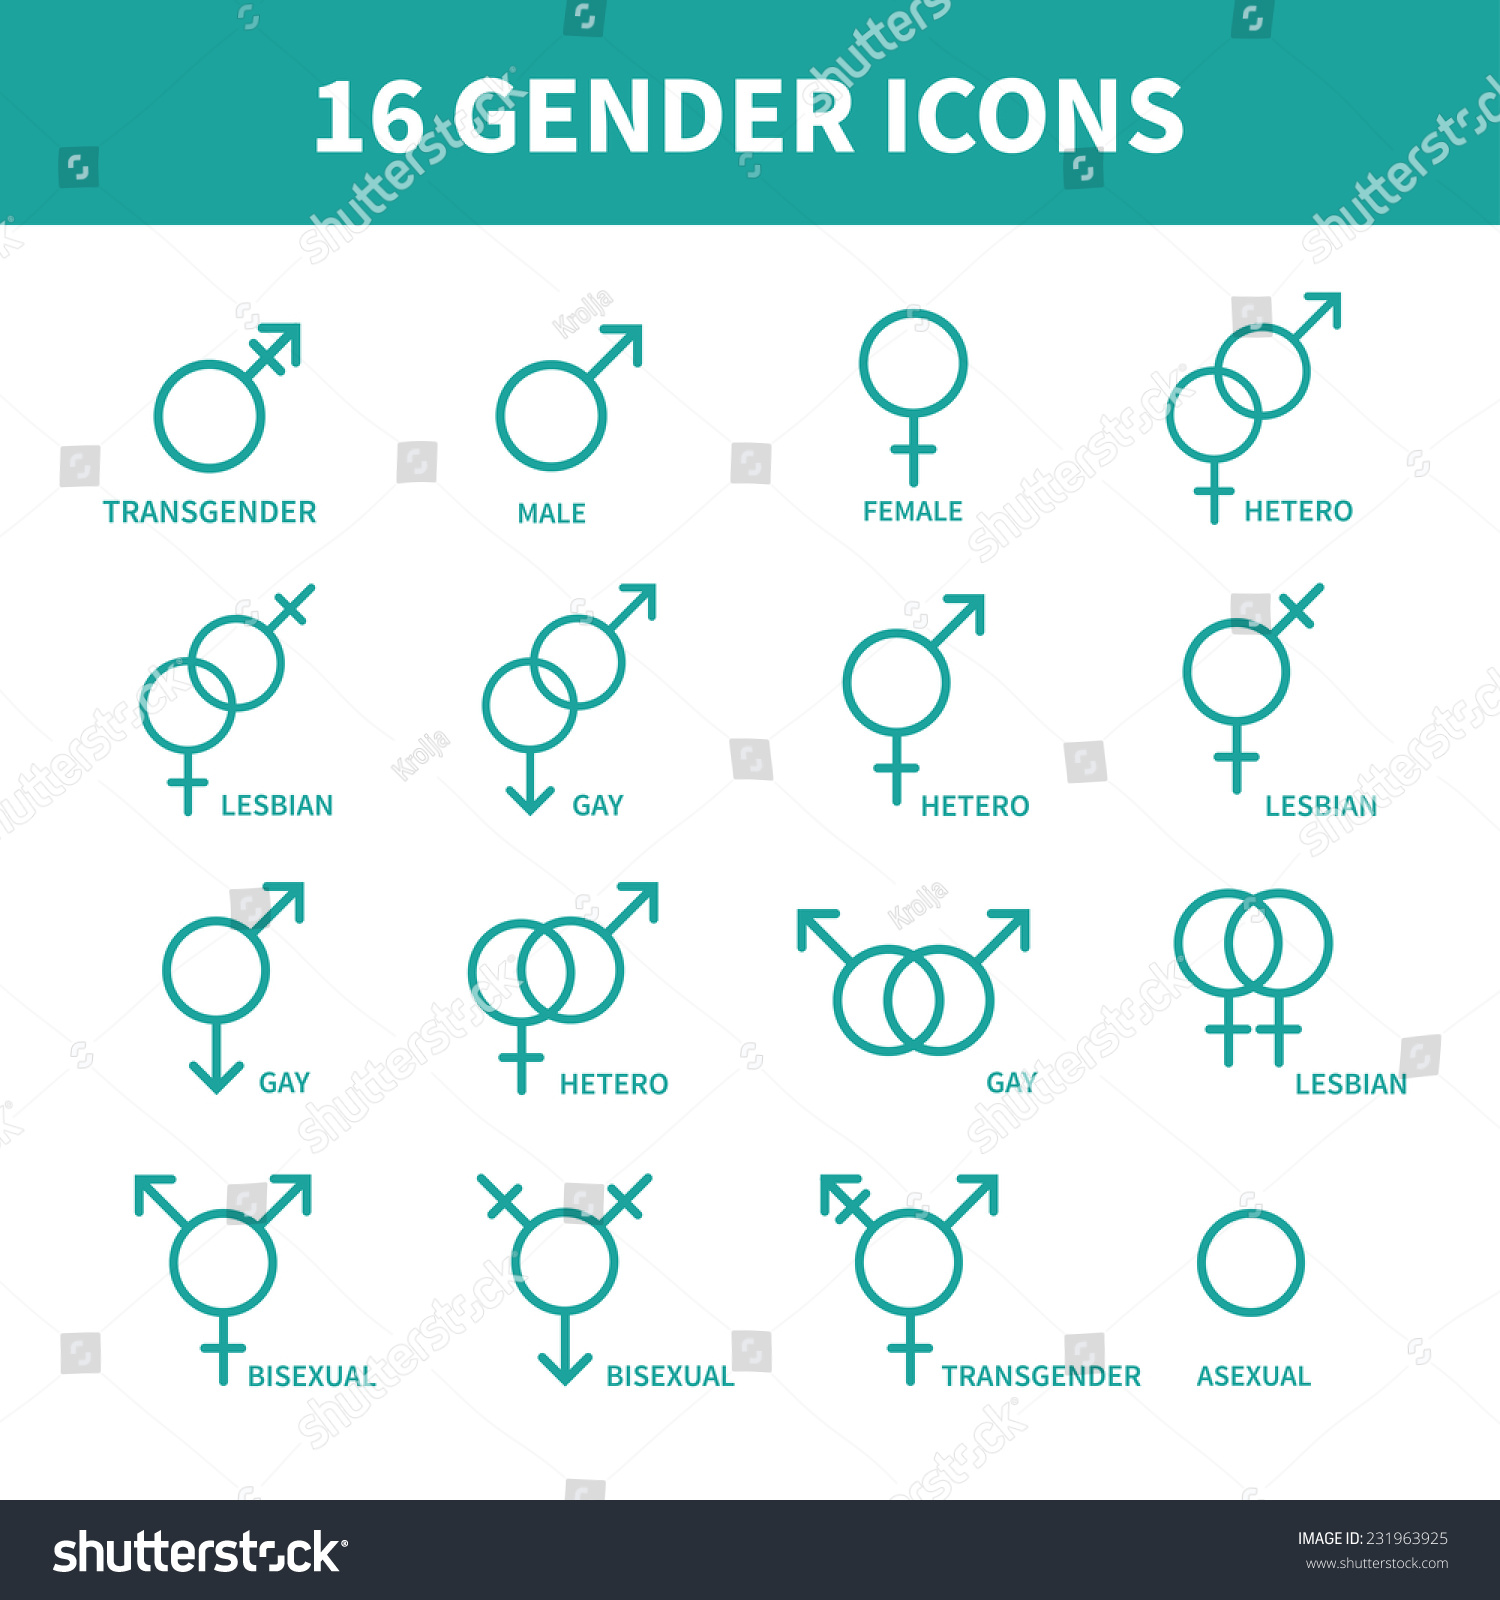 Sexual Orientation Gender Web Iconssymbolsign In Flat Style Male And Female Combination